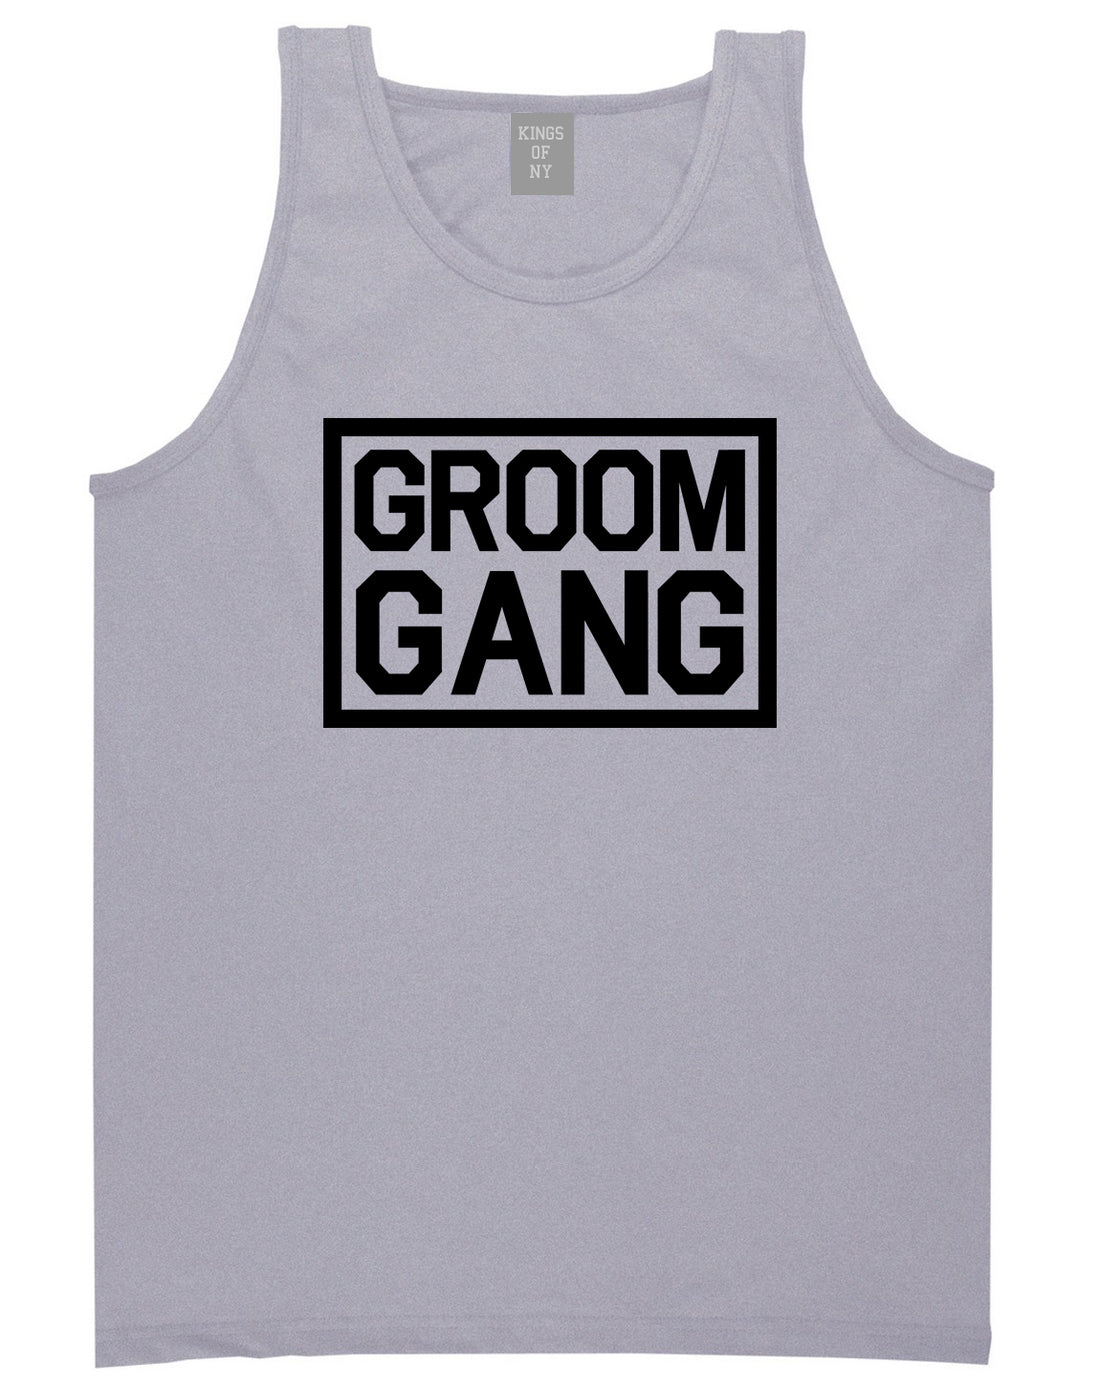 Groom Gang Bachelor Party Grey Tank Top Shirt by Kings Of NY